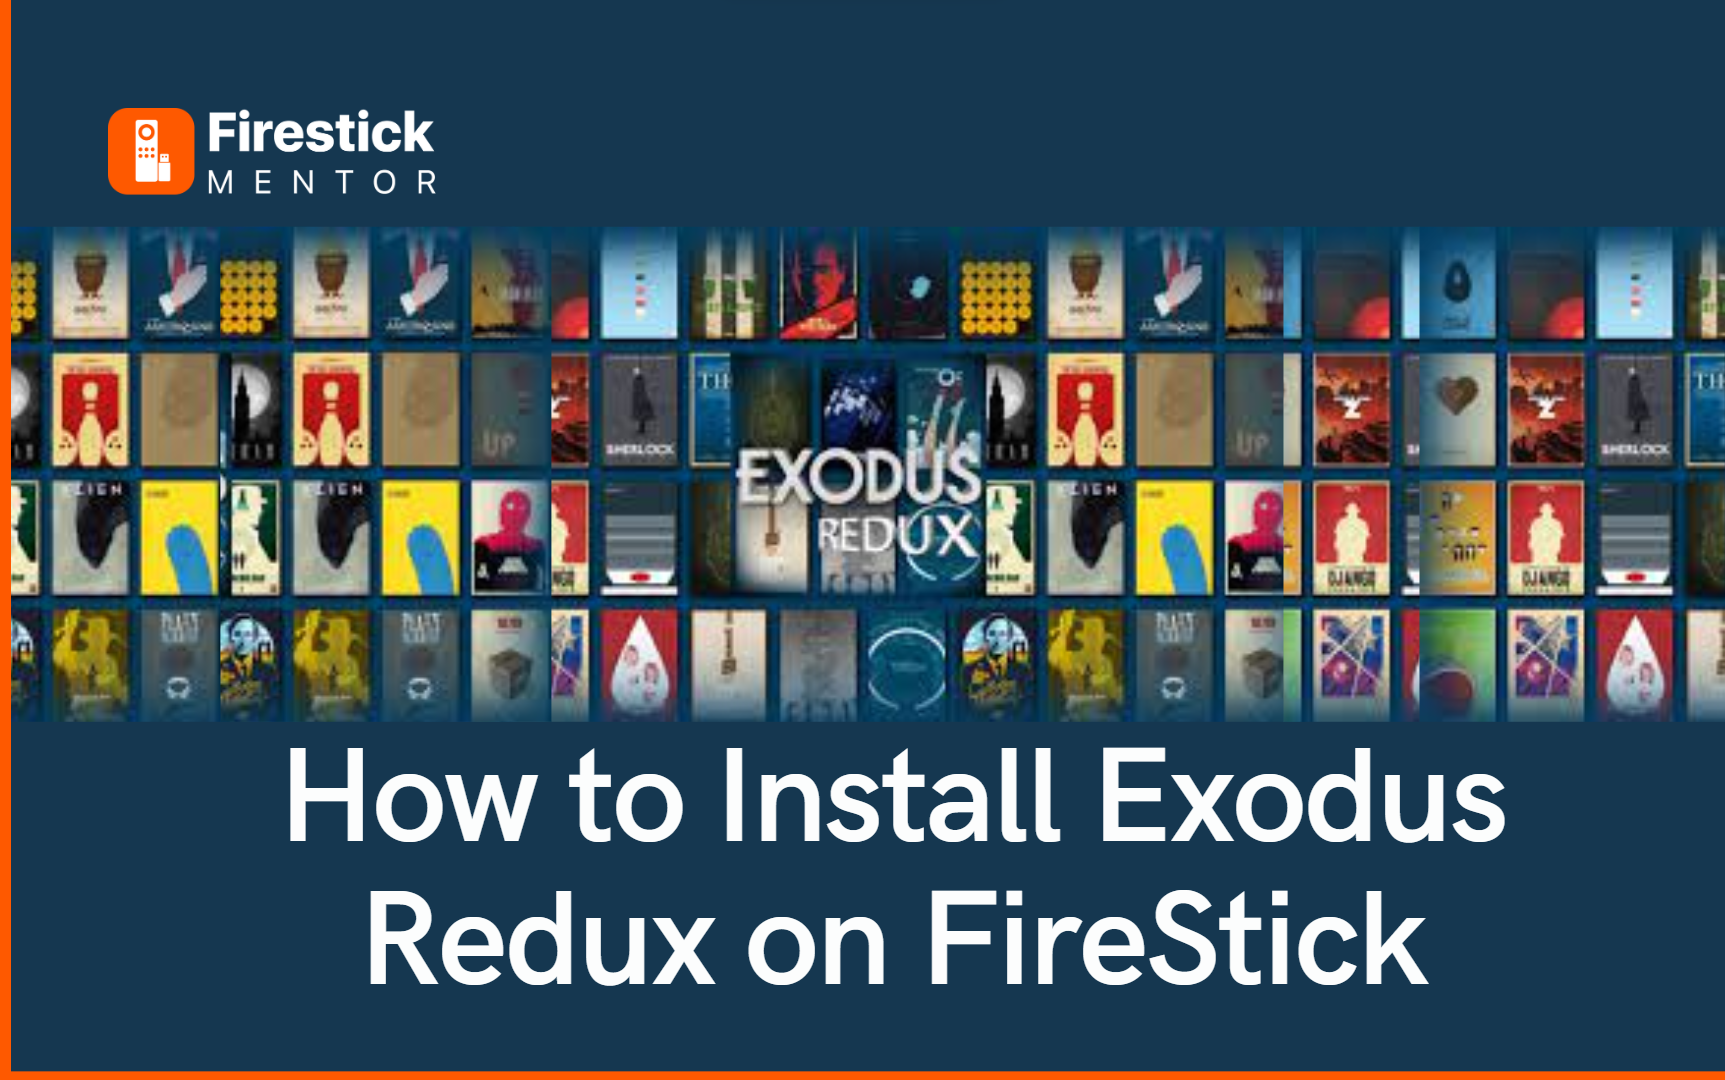 How to Install Exodus Redux on FireStick